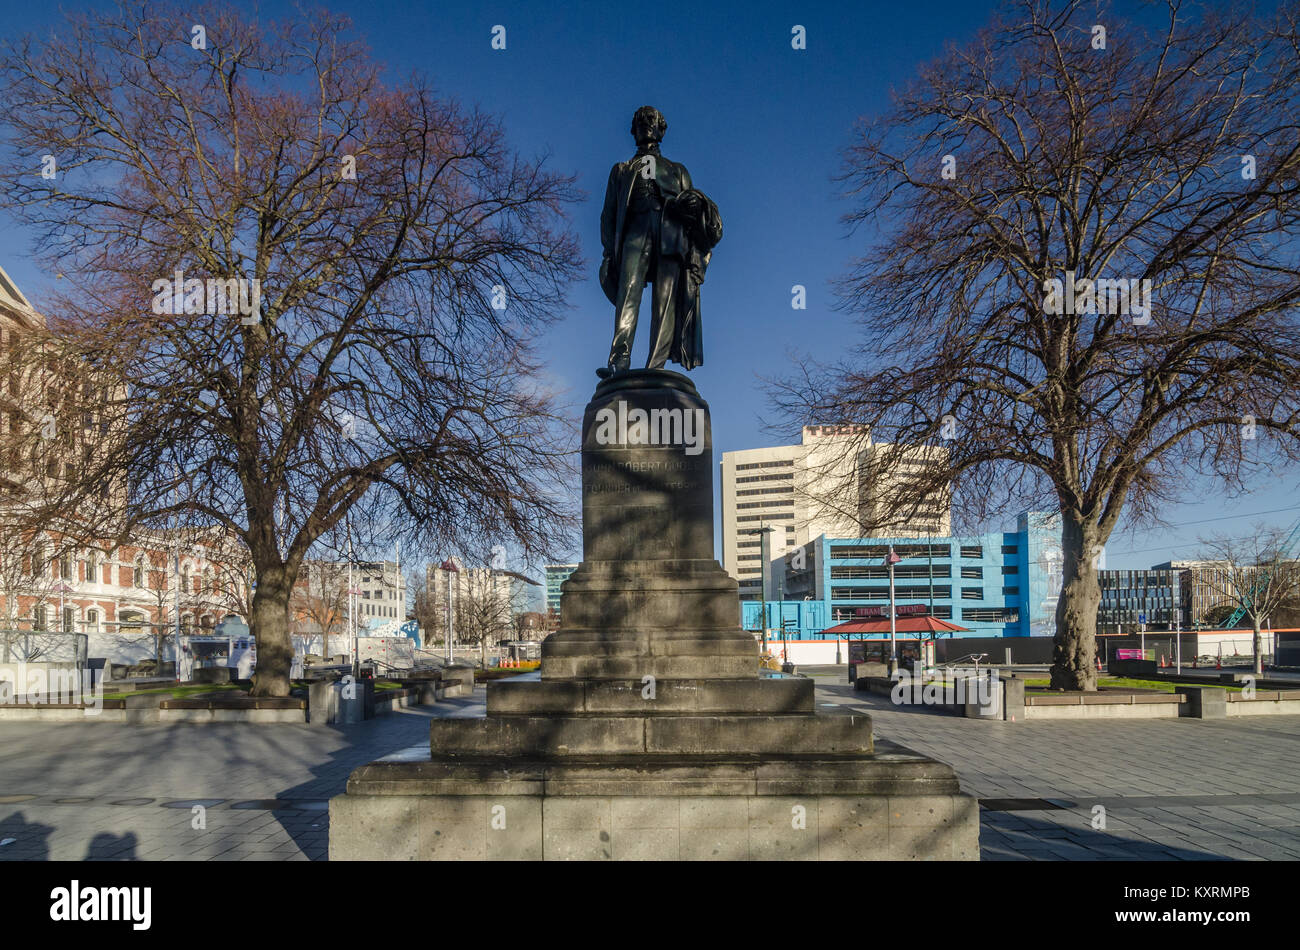 John Robert Godley Statue in Christchurch. Godley was an Irish statesman and bureaucrat, he is considered to be the founder of Canterbury, New Zealand Stock Photo